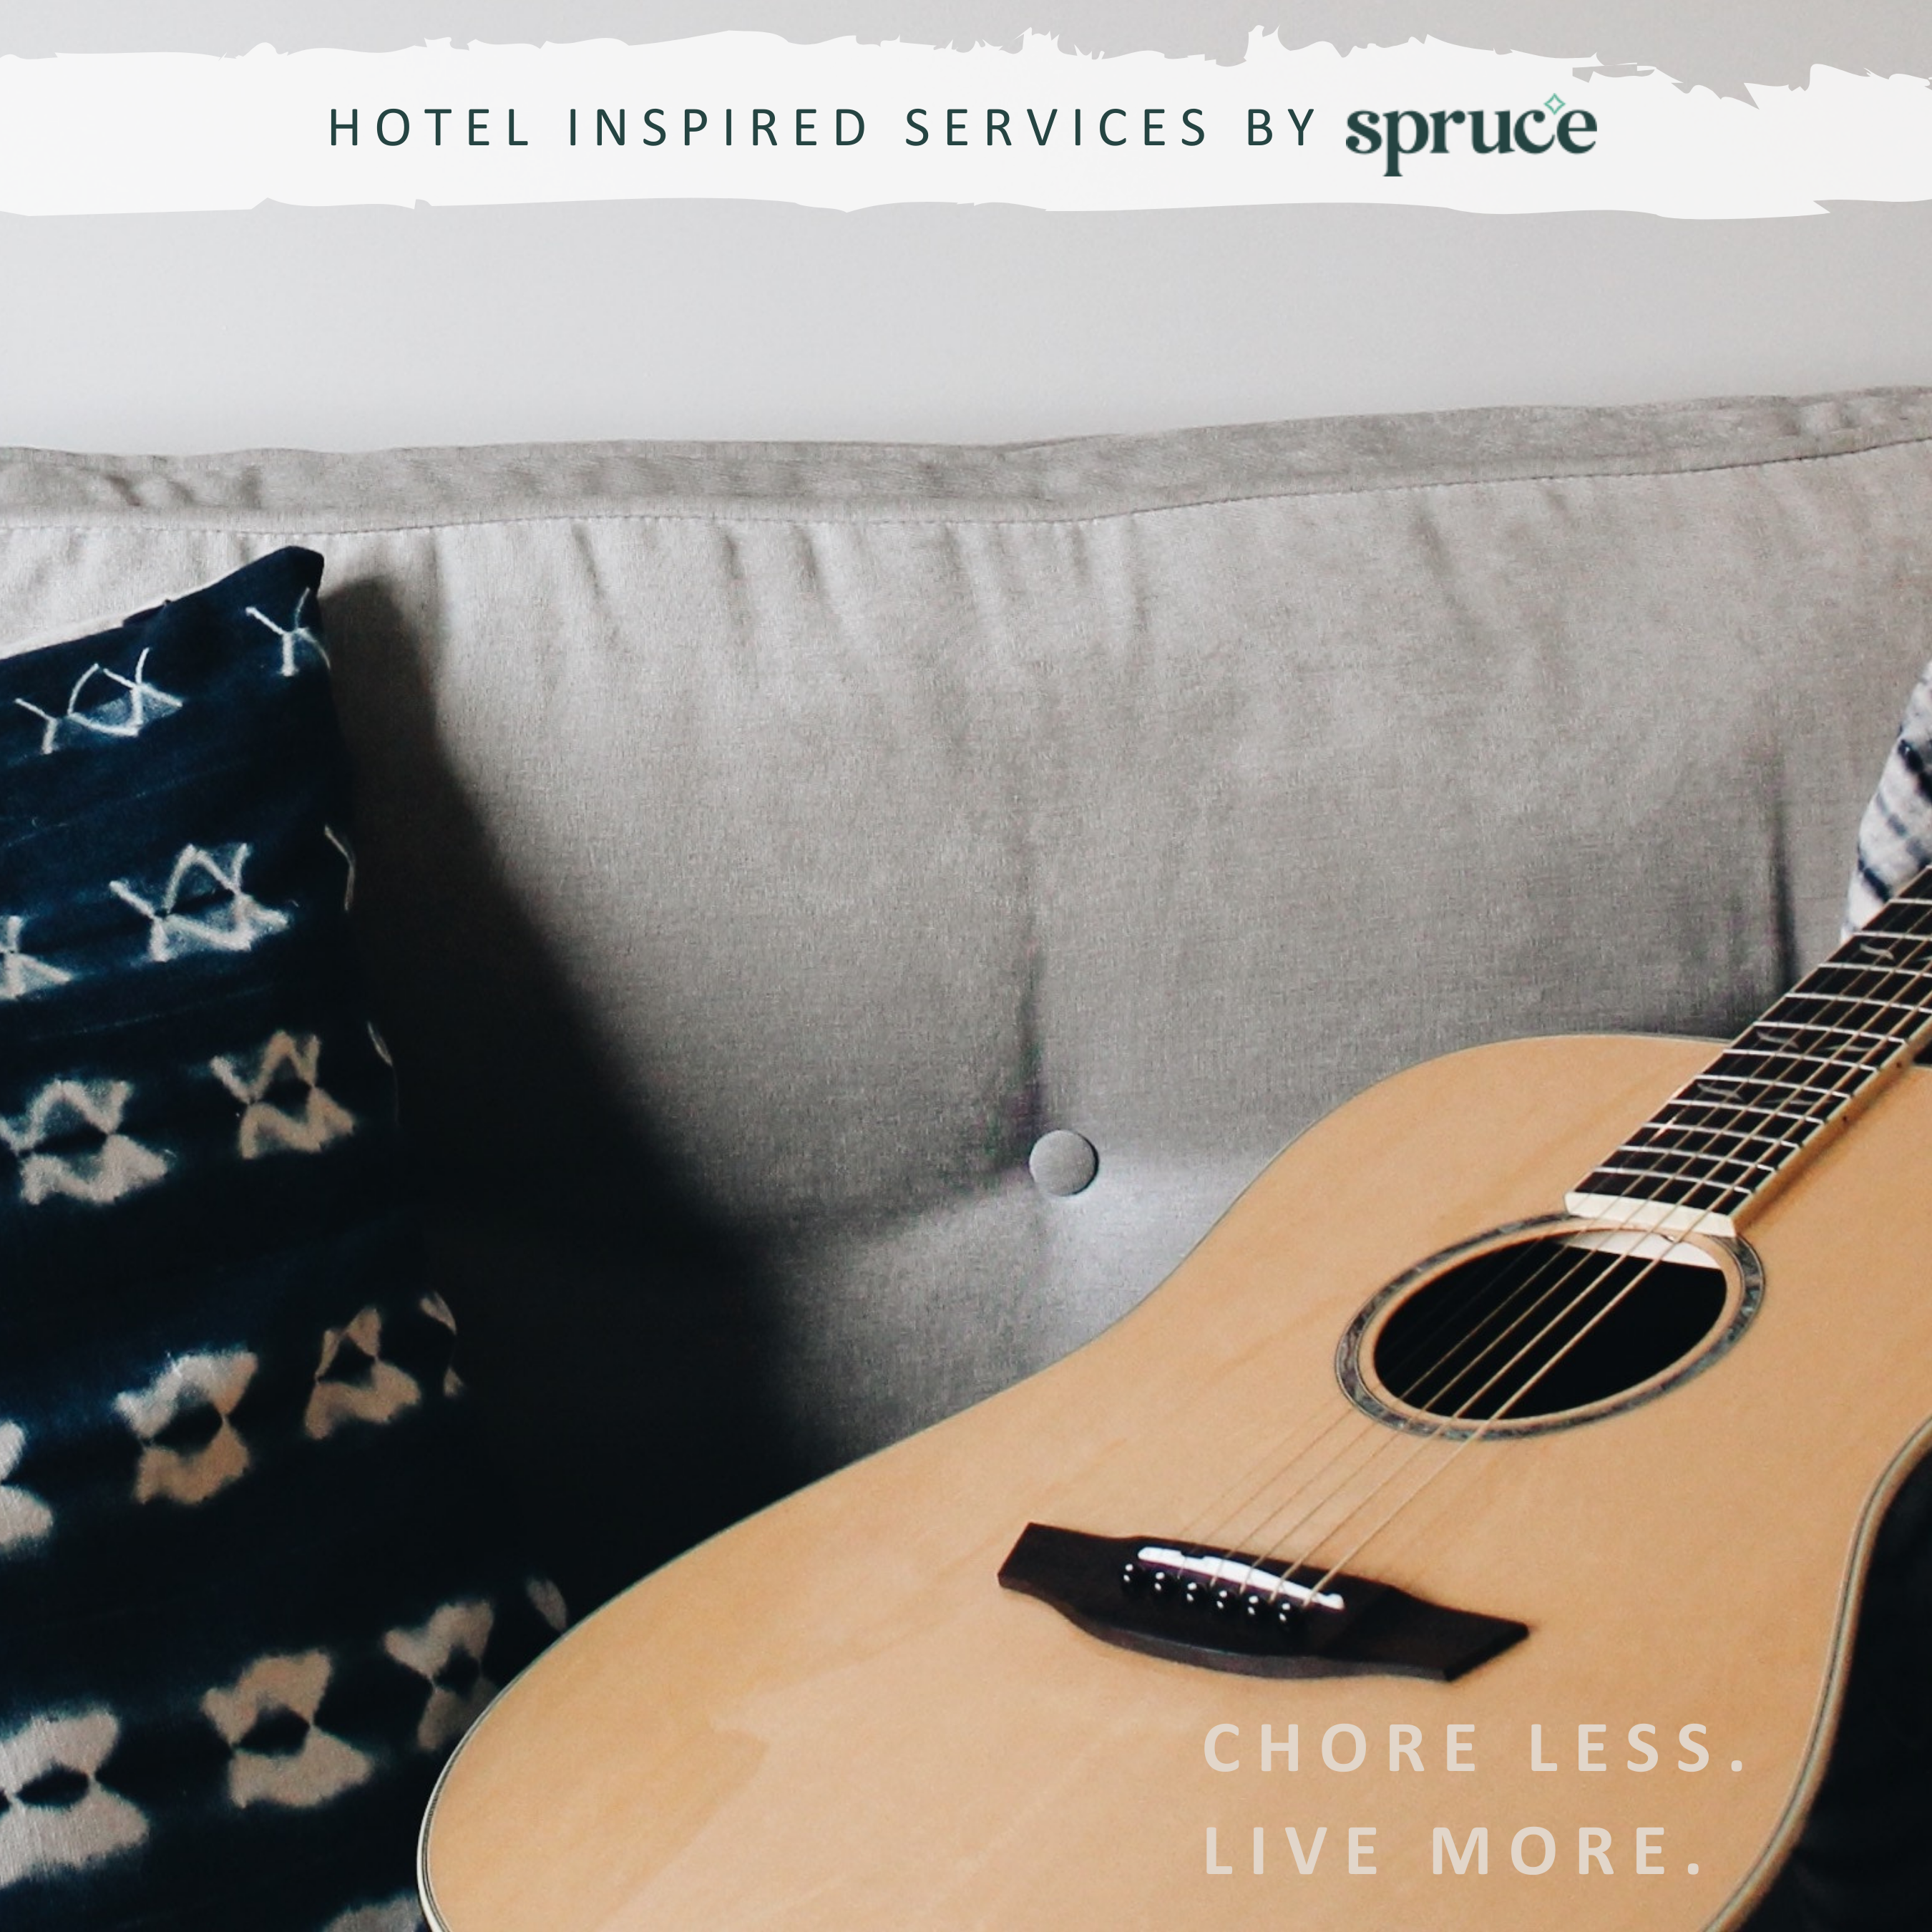 Hotel inspired services by Spruce